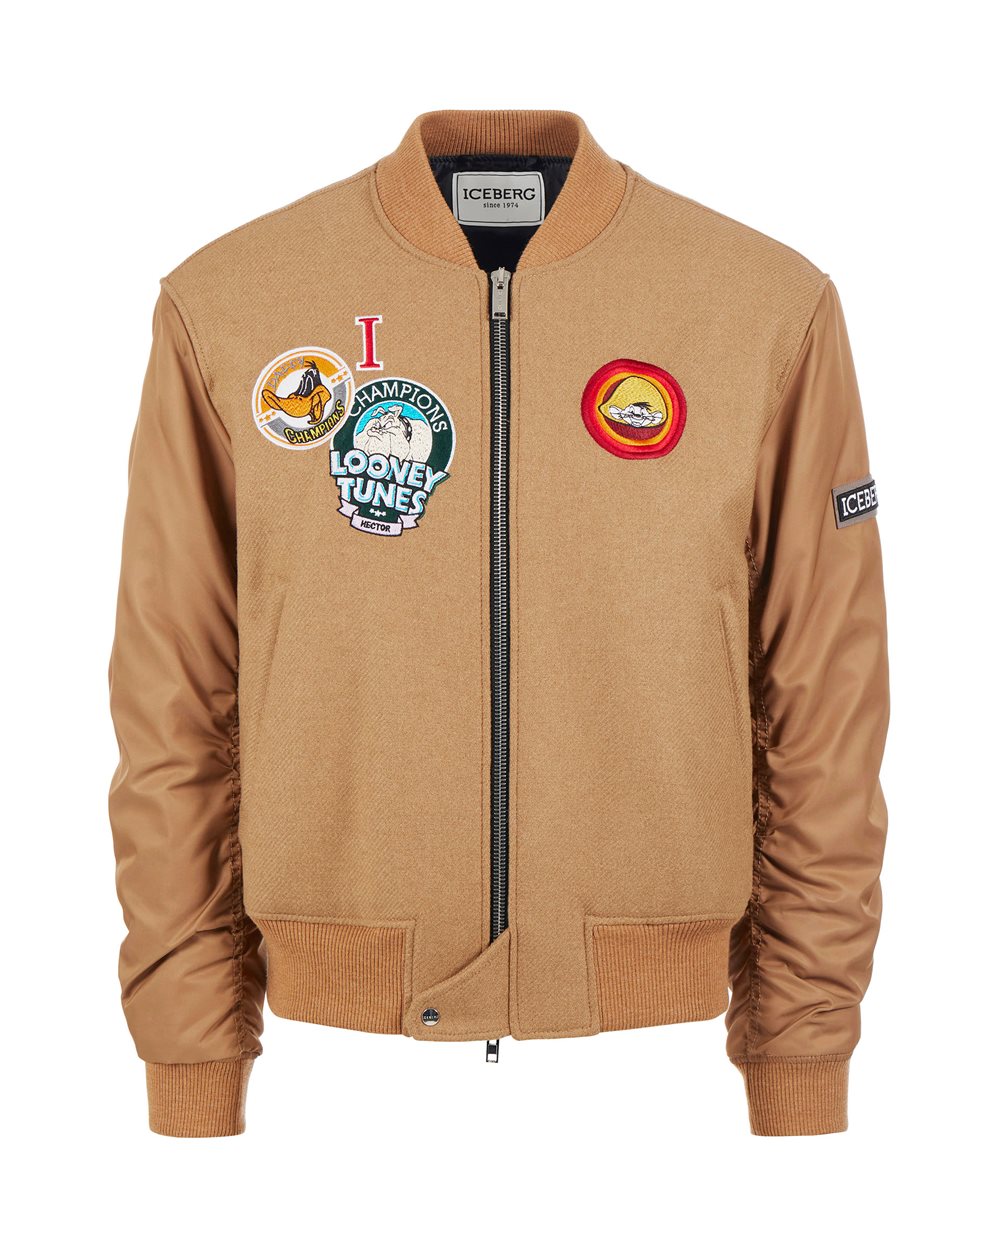 Bomber jacket with cartoon patches and logo - PER FARE LE REGOLE | Iceberg - Official Website